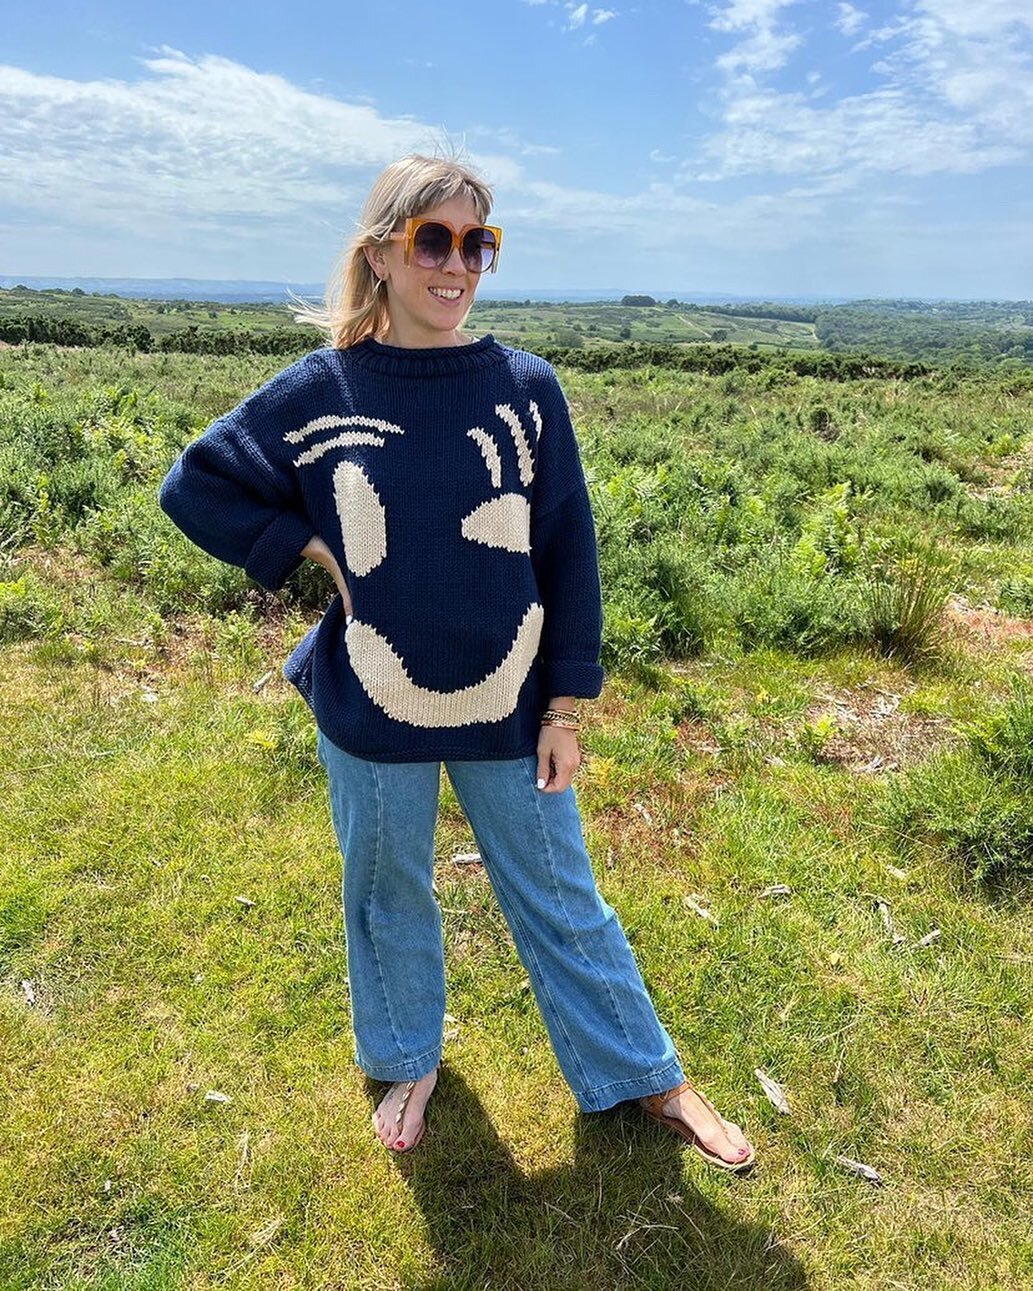 @girlwithbellsandwhistles looking SO good in the navy Feel Good Jumper! Thank you so much Kirsty 🙌🏼 😎 #knit #knitwear #handknit #madebyhand #summeroutfit #knitting_inspiration #knittersofinstagram